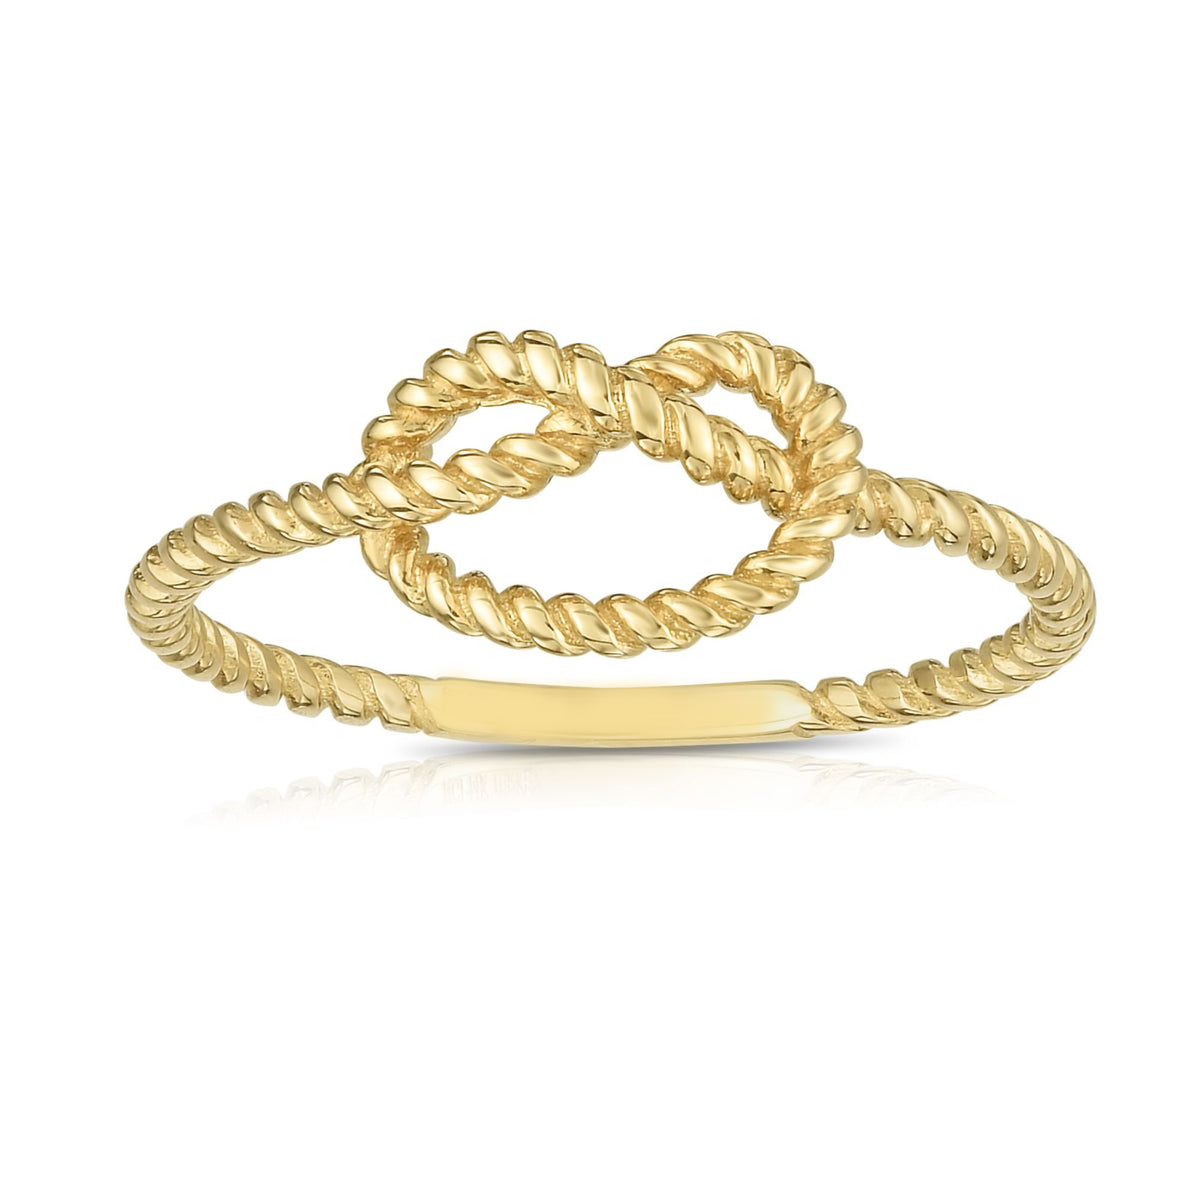 14k Yellow Gold Twisted Cable Knot Ring, Size 7 fine designer jewelry for men and women